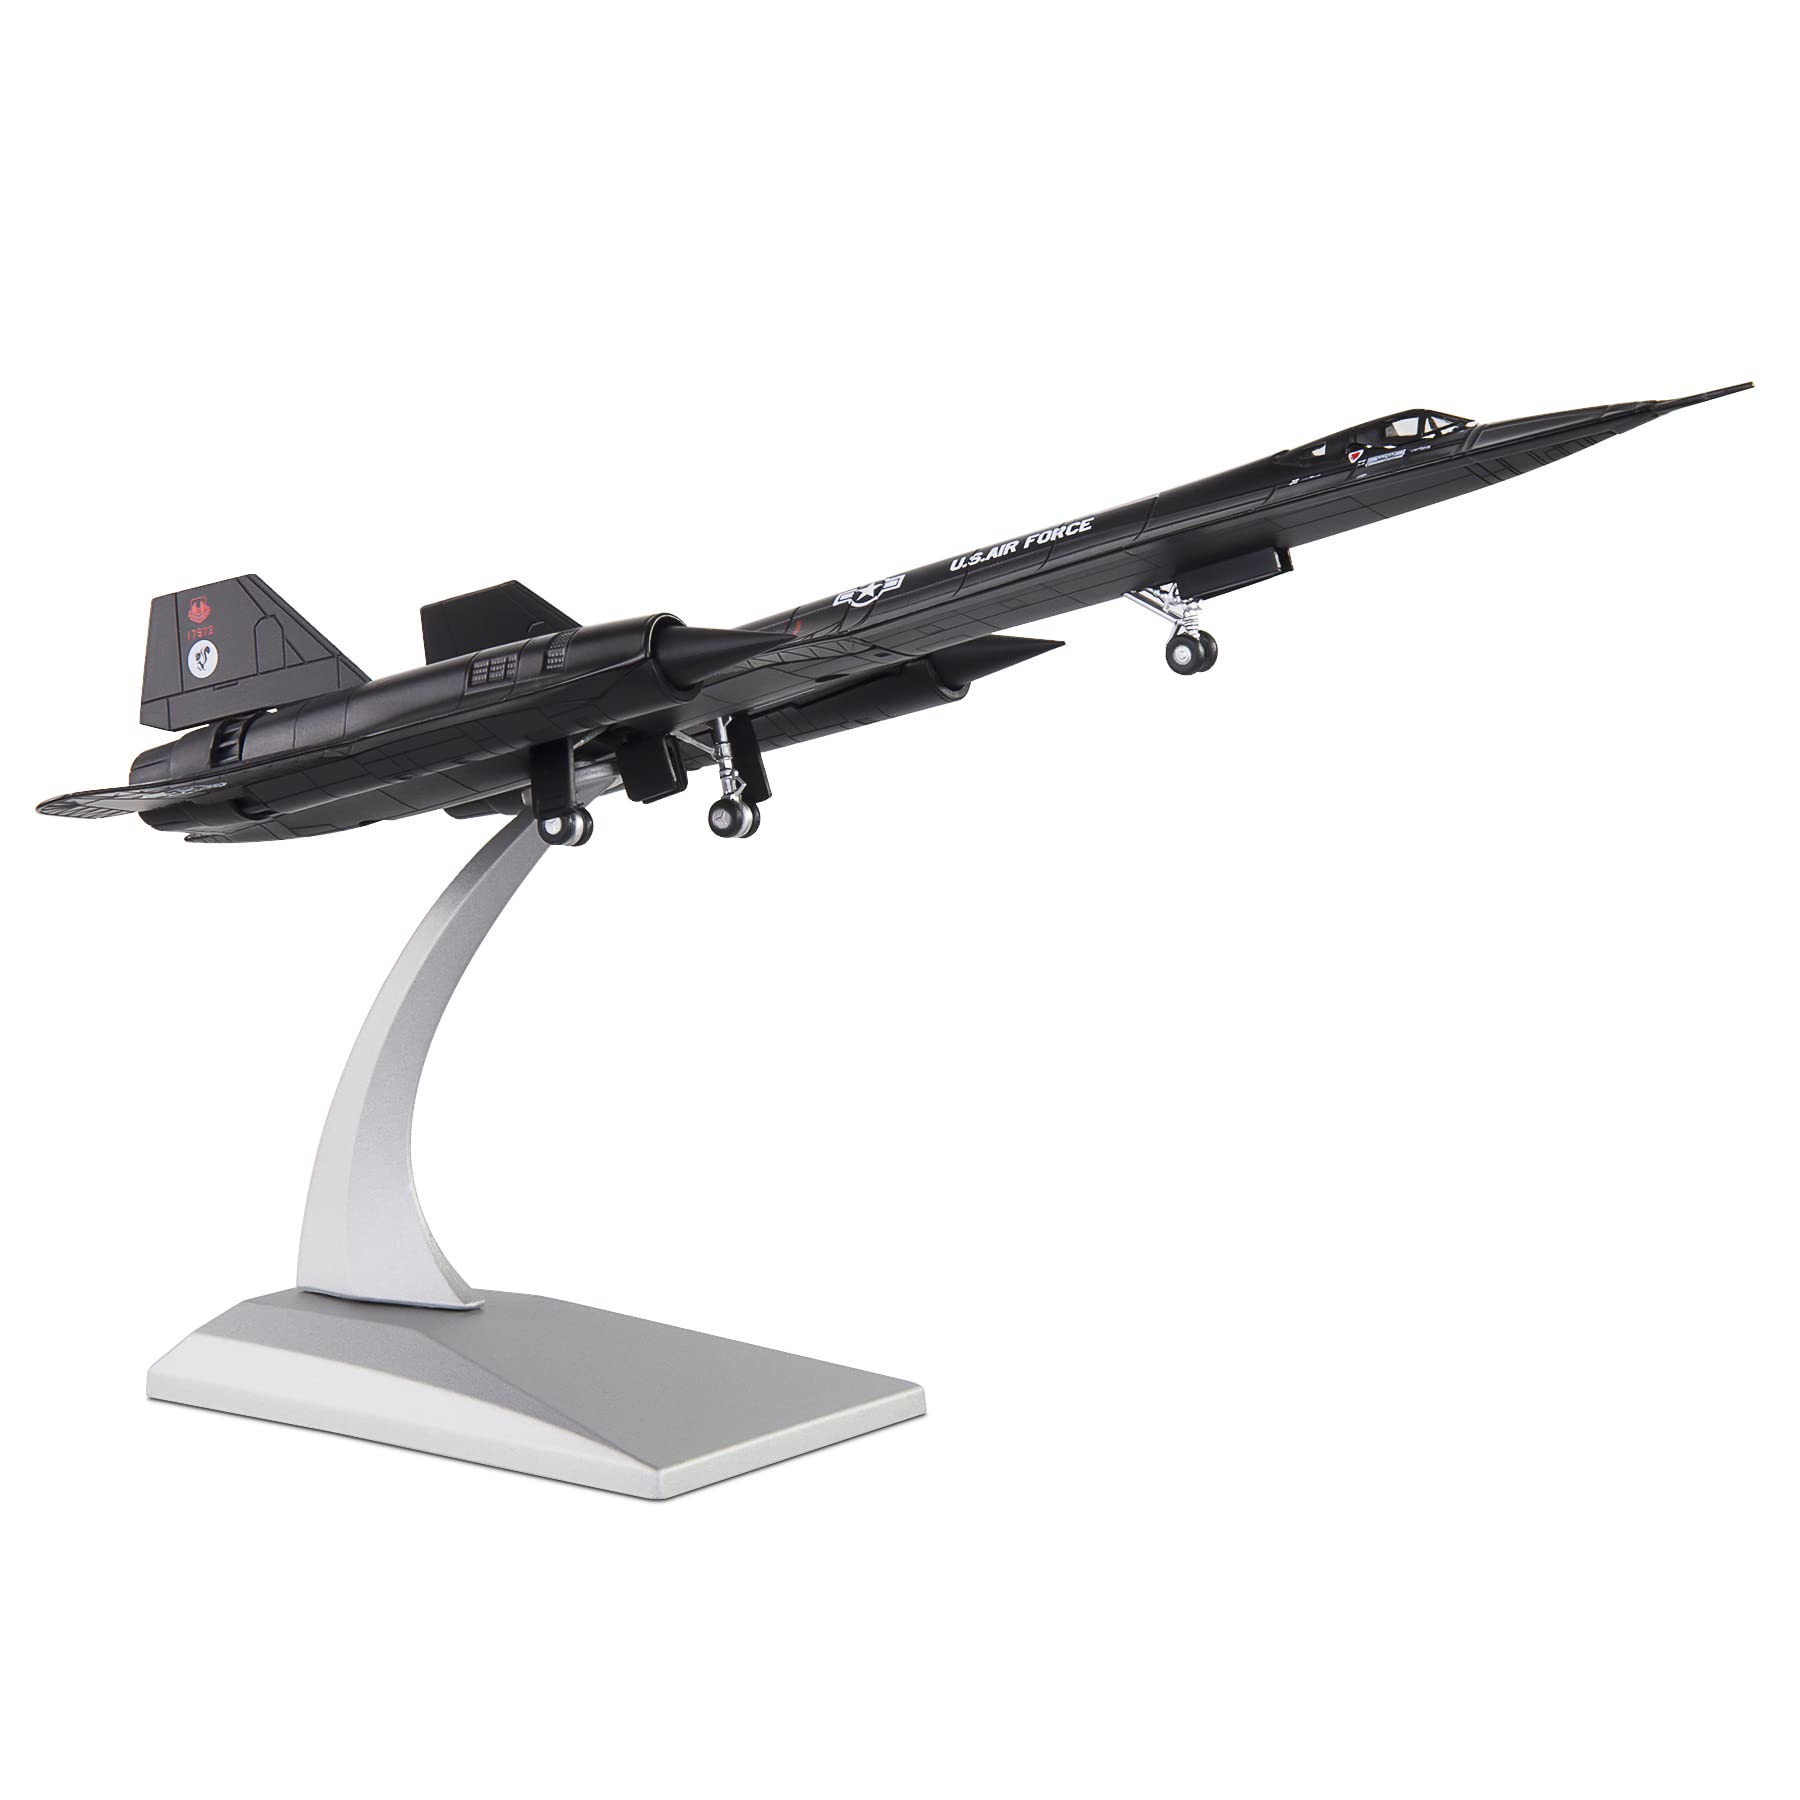 1/144 SR71 Skunk High-Altitude Reconnaissance Aircraft Metal Fighter Military Model Diecast Plane Model for Collection or Gift